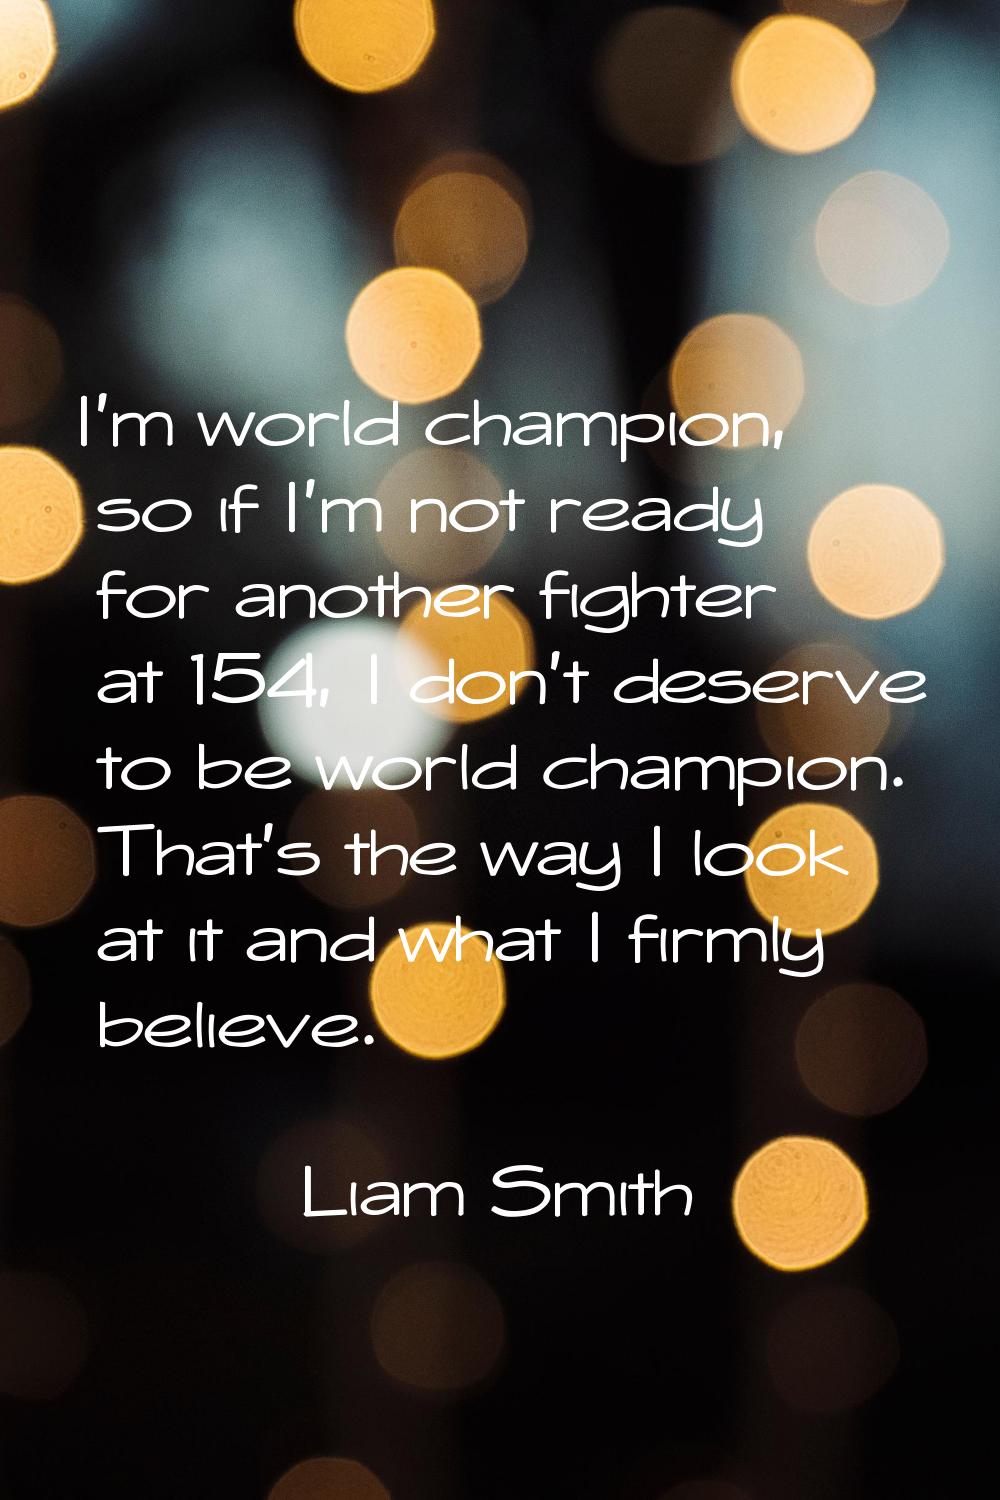 I'm world champion, so if I'm not ready for another fighter at 154, I don't deserve to be world cha